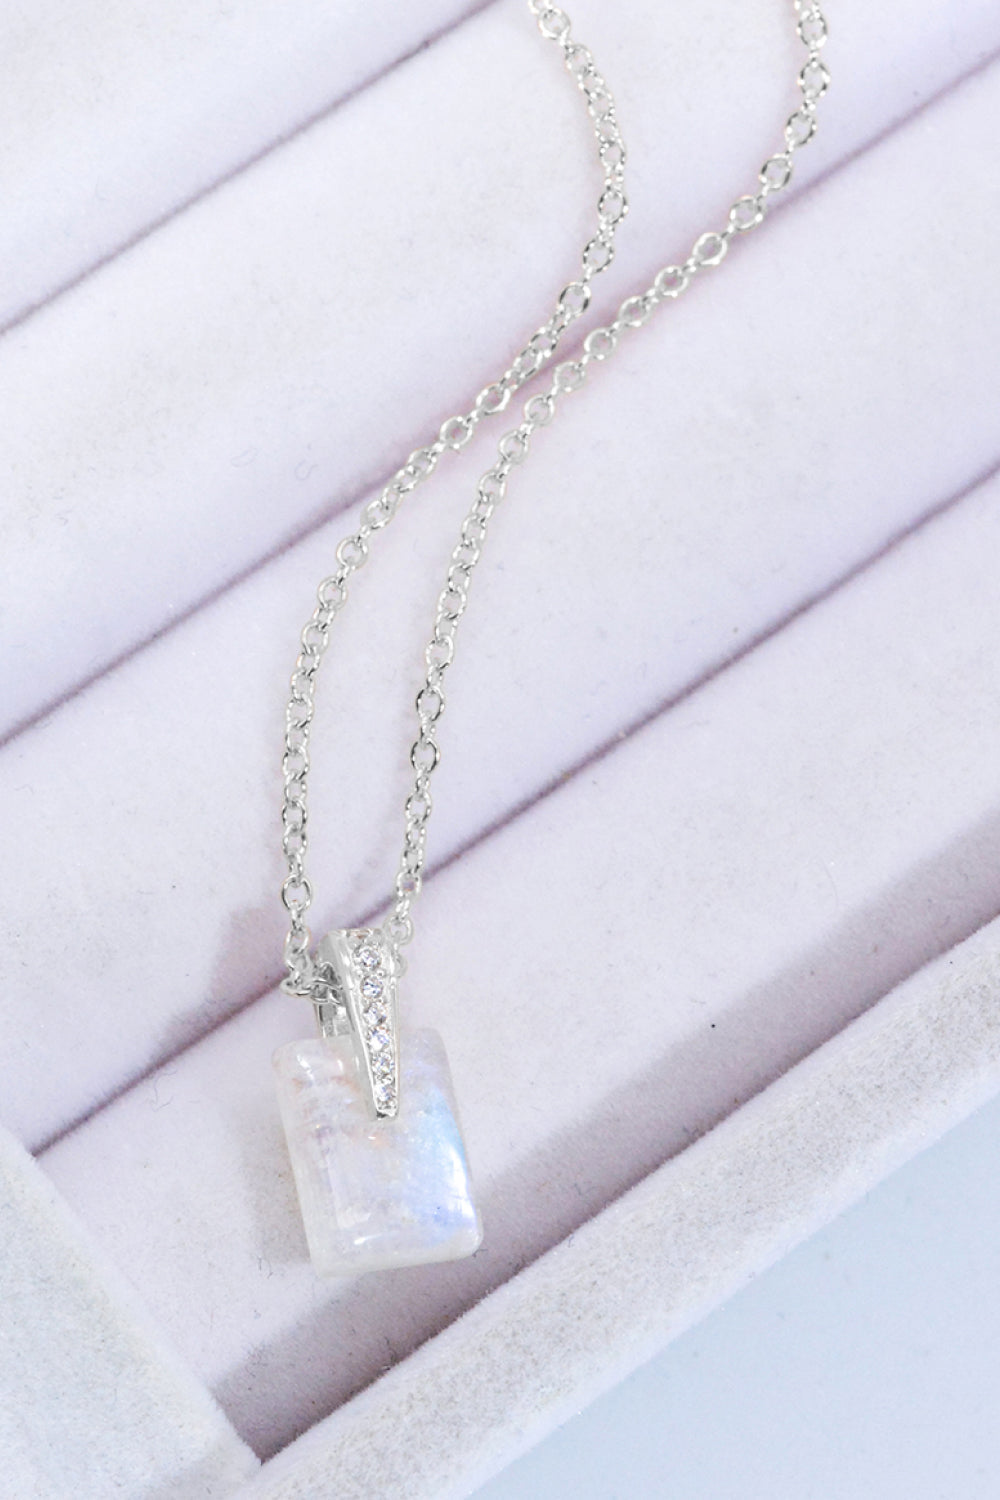 925 Sterling Silver Natural Moonstone Pendant Necklace - Necklaces - FITGGINS